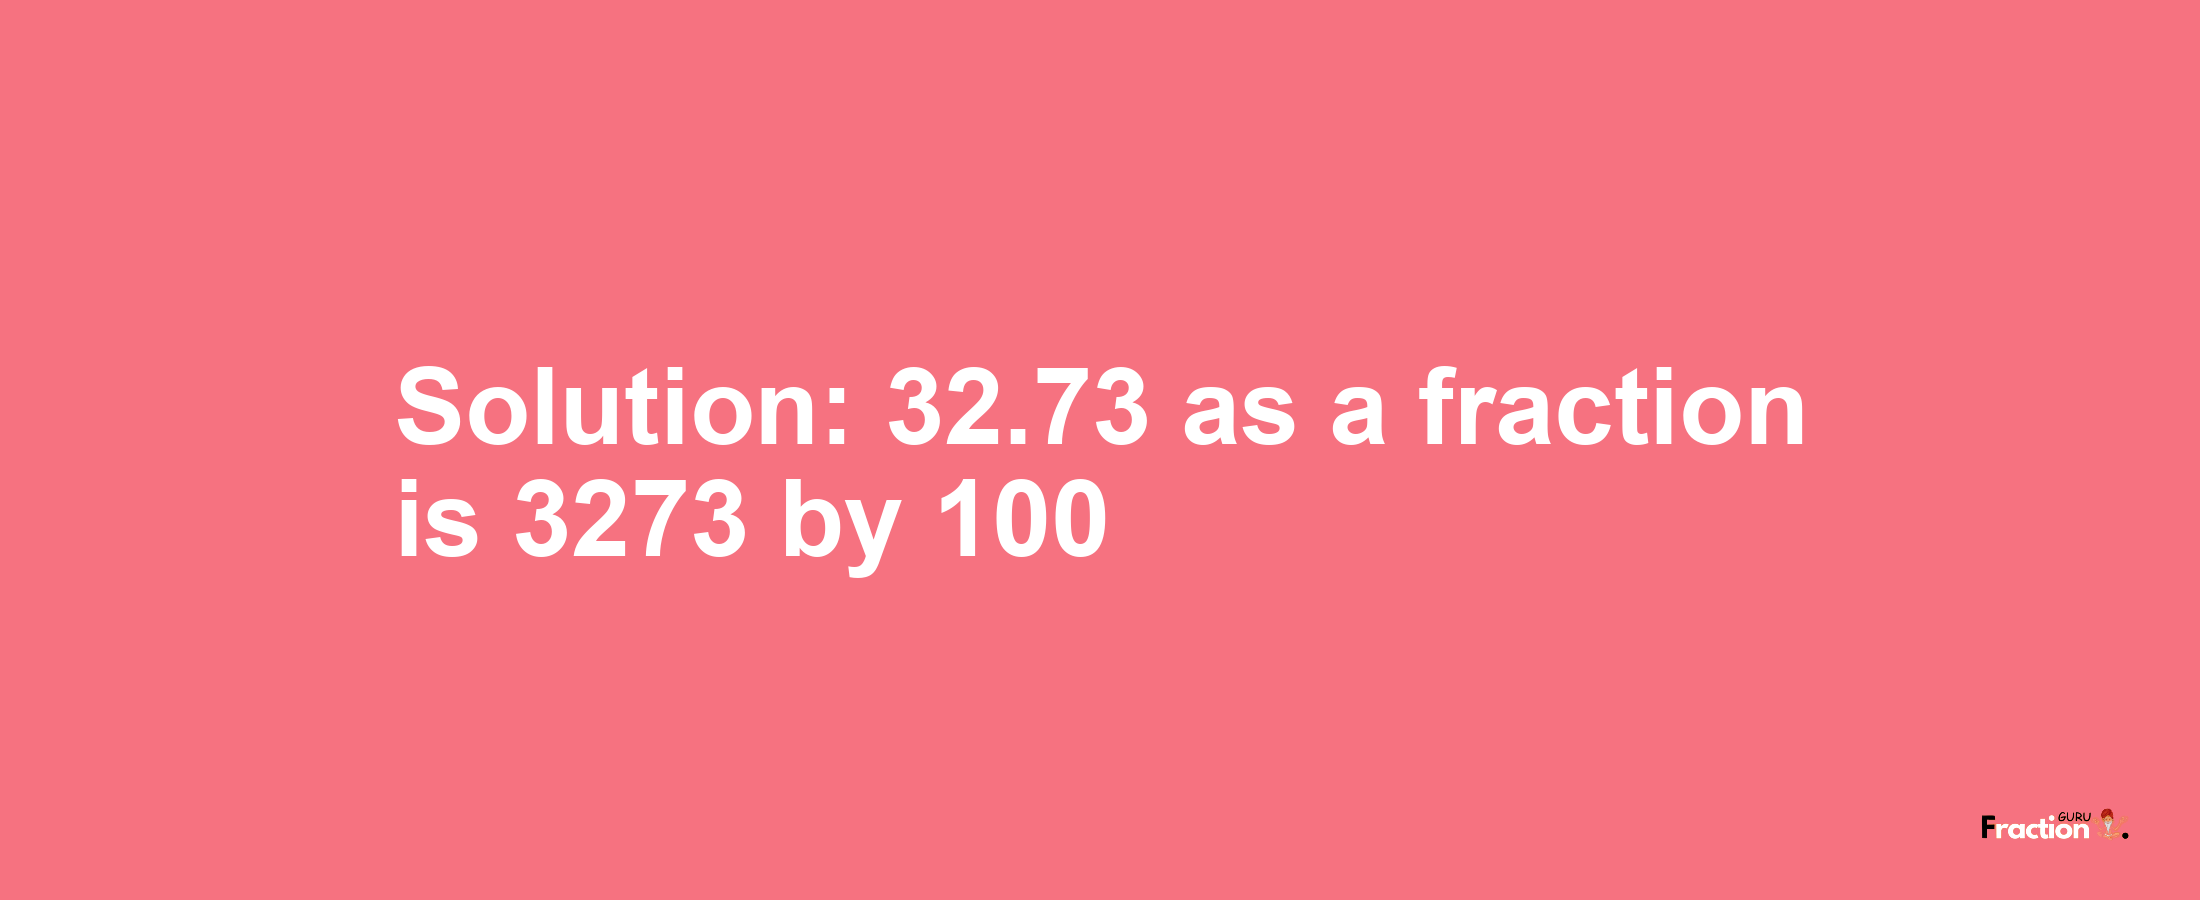 Solution:32.73 as a fraction is 3273/100